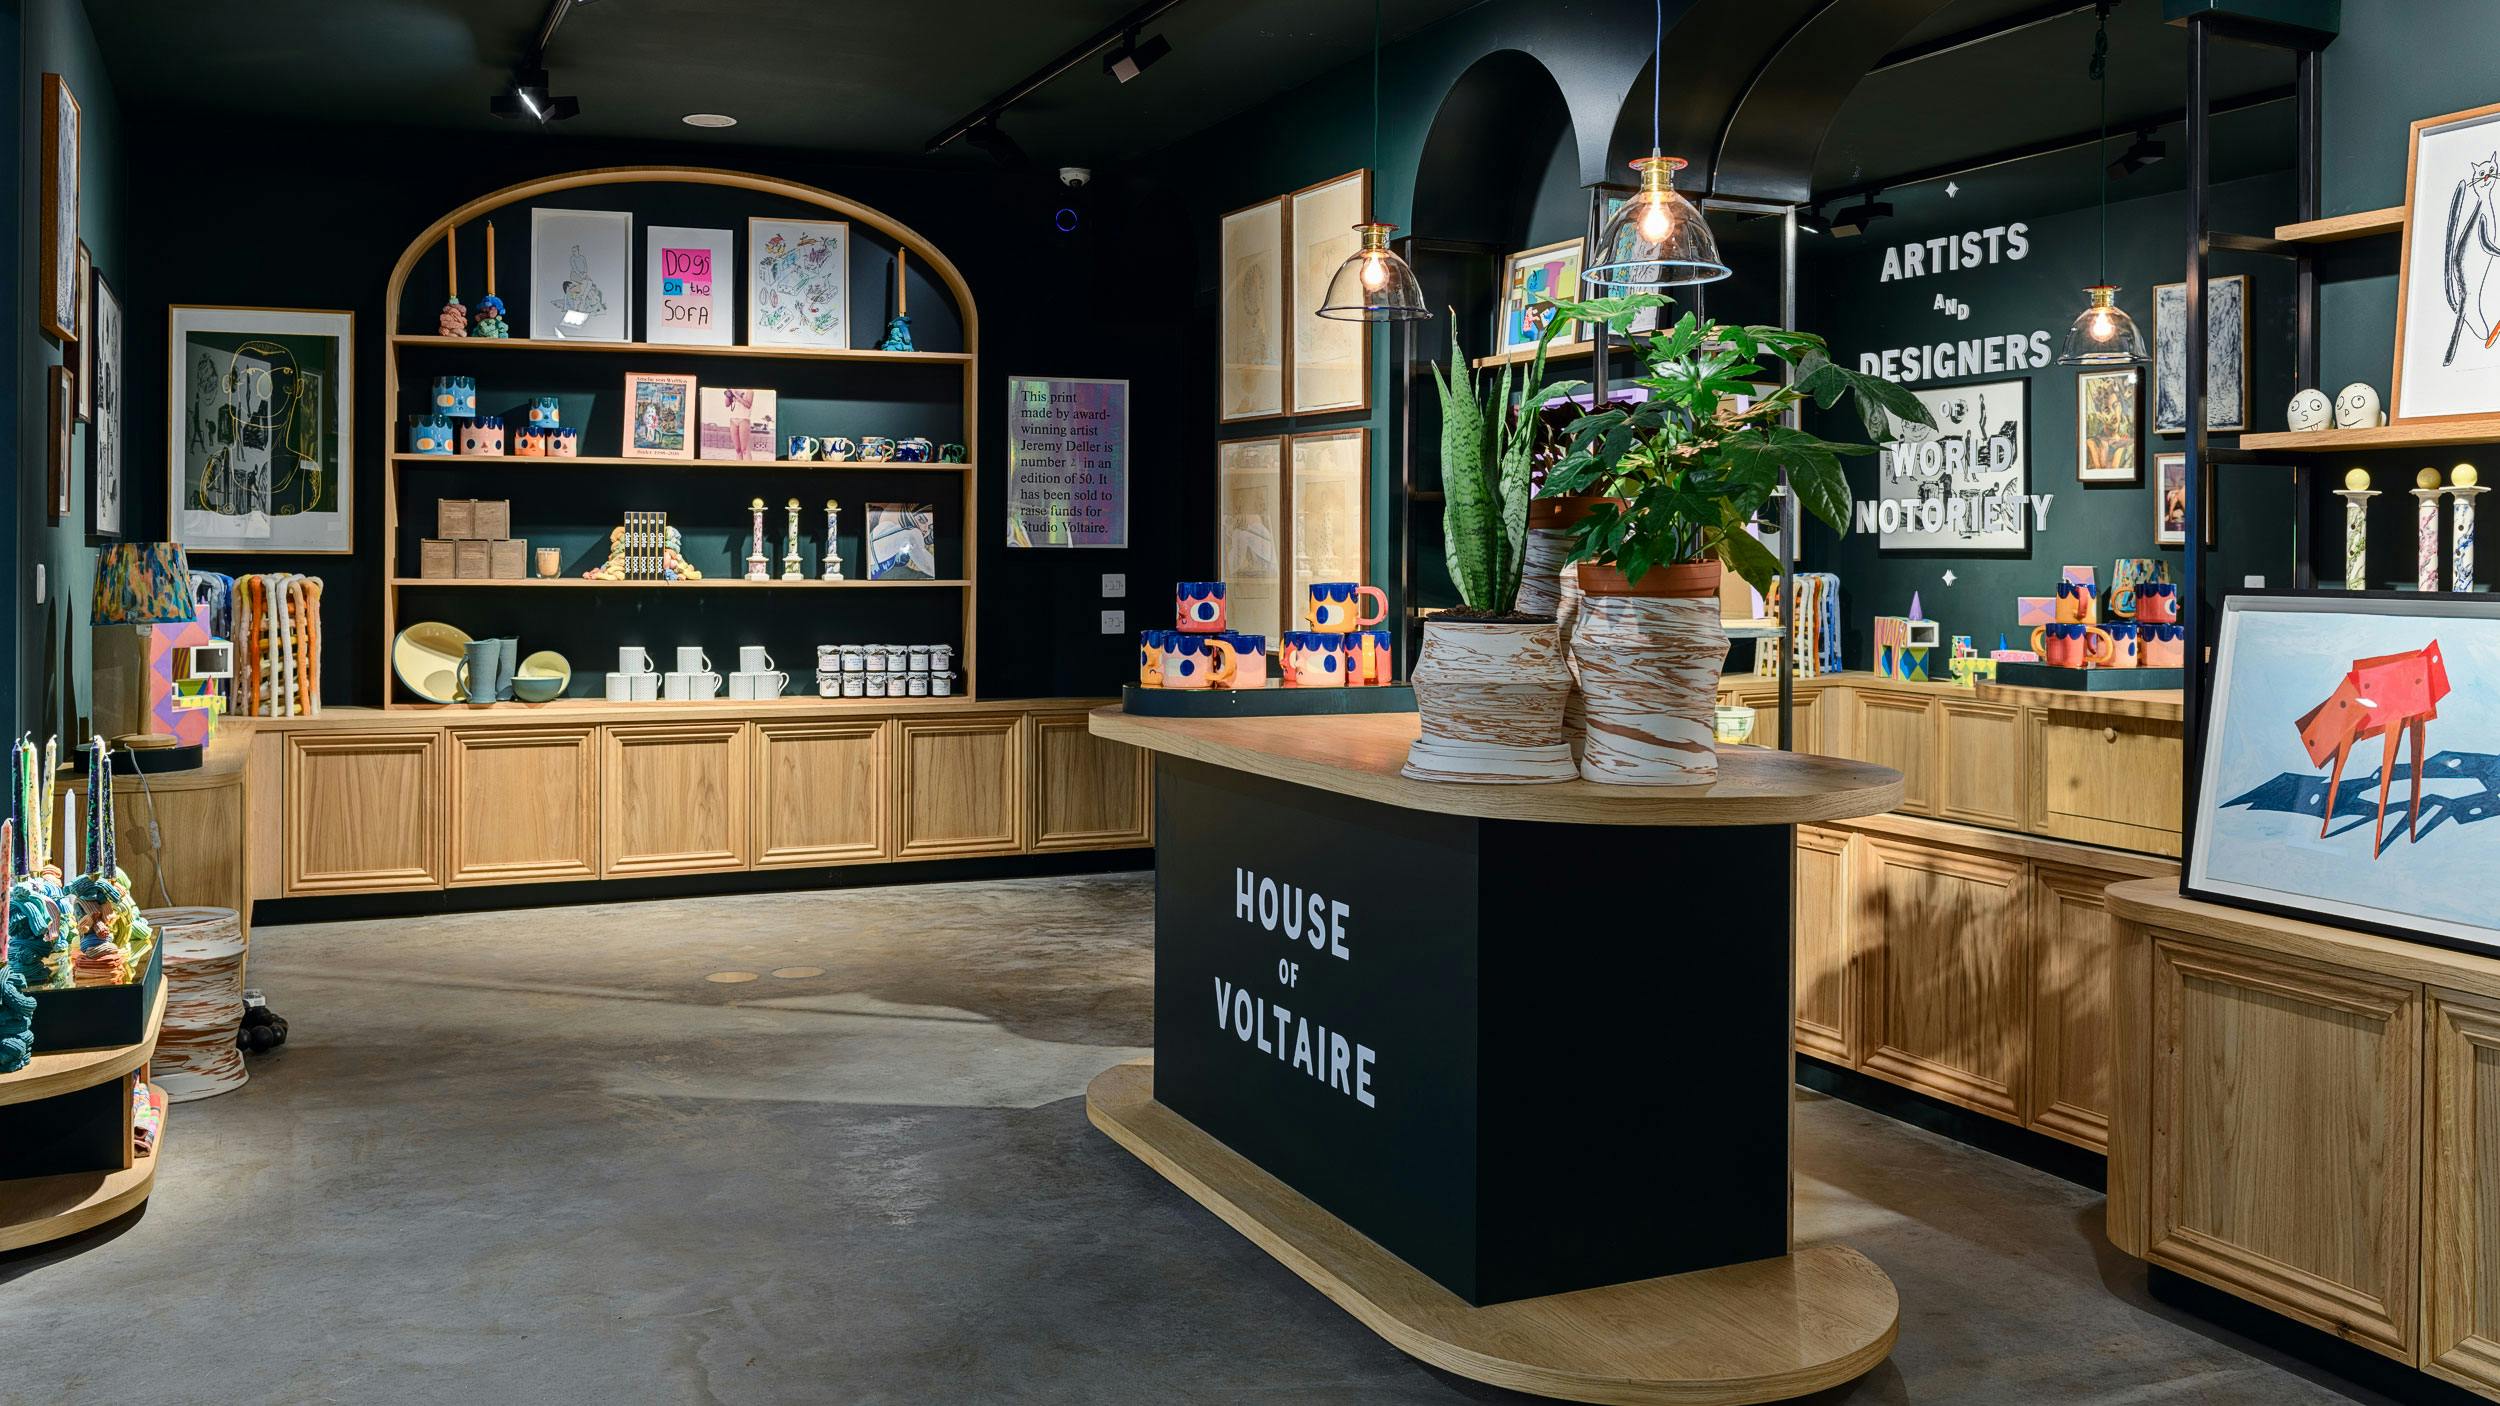 An interior photograph of the House of Voltaire store. The walls are painted a dark green, and in built shelving Ash wood shelving line the walls. The shelving is filled with uniquer artworks and homeware objects.